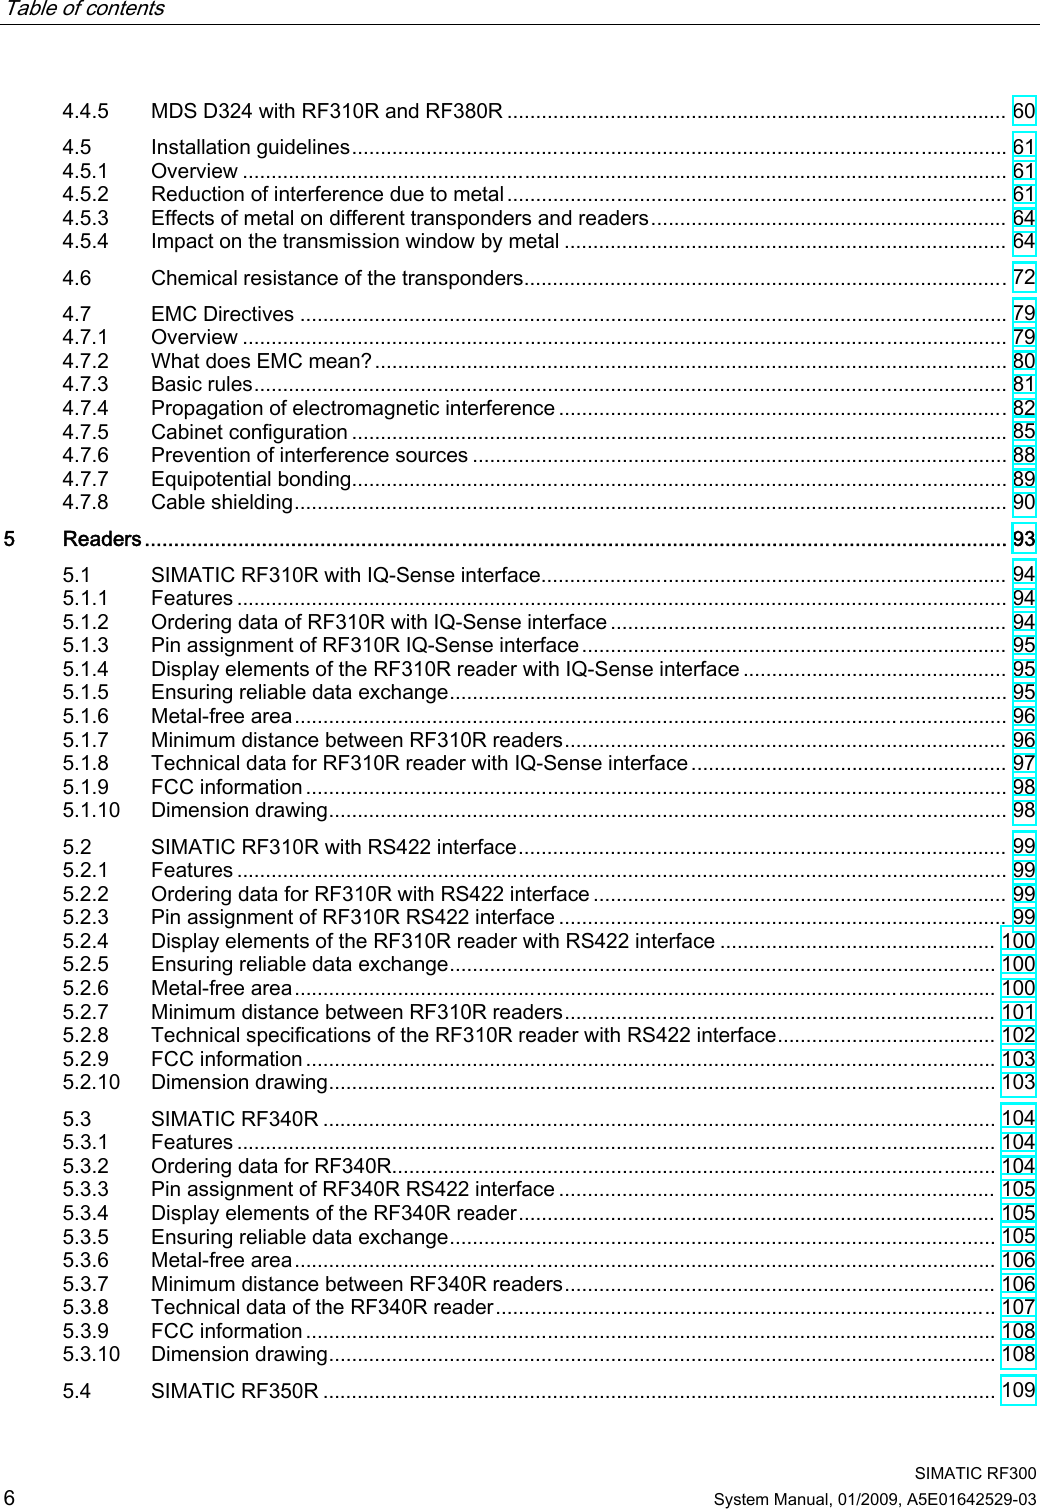 Table of contents      SIMATIC RF300 6 System Manual, 01/2009, A5E01642529-03 4.4.5  MDS D324 with RF310R and RF380R ....................................................................................... 60 4.5  Installation guidelines.................................................................................................................. 61 4.5.1  Overview ..................................................................................................................................... 61 4.5.2  Reduction of interference due to metal ....................................................................................... 61 4.5.3  Effects of metal on different transponders and readers.............................................................. 64 4.5.4  Impact on the transmission window by metal ............................................................................. 64 4.6  Chemical resistance of the transponders....................................................................................72 4.7  EMC Directives ........................................................................................................................... 79 4.7.1  Overview ..................................................................................................................................... 79 4.7.2  What does EMC mean?.............................................................................................................. 80 4.7.3  Basic rules................................................................................................................................... 81 4.7.4  Propagation of electromagnetic interference ..............................................................................82 4.7.5  Cabinet configuration .................................................................................................................. 85 4.7.6  Prevention of interference sources ............................................................................................. 88 4.7.7  Equipotential bonding.................................................................................................................. 89 4.7.8  Cable shielding............................................................................................................................ 90 5  Readers................................................................................................................................................... 93 5.1  SIMATIC RF310R with IQ-Sense interface................................................................................. 94 5.1.1  Features ...................................................................................................................................... 94 5.1.2  Ordering data of RF310R with IQ-Sense interface ..................................................................... 94 5.1.3  Pin assignment of RF310R IQ-Sense interface.......................................................................... 95 5.1.4  Display elements of the RF310R reader with IQ-Sense interface .............................................. 95 5.1.5  Ensuring reliable data exchange................................................................................................. 95 5.1.6  Metal-free area............................................................................................................................ 96 5.1.7  Minimum distance between RF310R readers............................................................................. 96 5.1.8  Technical data for RF310R reader with IQ-Sense interface....................................................... 97 5.1.9  FCC information .......................................................................................................................... 98 5.1.10  Dimension drawing...................................................................................................................... 98 5.2  SIMATIC RF310R with RS422 interface..................................................................................... 99 5.2.1  Features ...................................................................................................................................... 99 5.2.2  Ordering data for RF310R with RS422 interface ........................................................................ 99 5.2.3  Pin assignment of RF310R RS422 interface .............................................................................. 99 5.2.4  Display elements of the RF310R reader with RS422 interface ................................................ 100 5.2.5  Ensuring reliable data exchange............................................................................................... 100 5.2.6  Metal-free area.......................................................................................................................... 100 5.2.7  Minimum distance between RF310R readers........................................................................... 101 5.2.8  Technical specifications of the RF310R reader with RS422 interface...................................... 102 5.2.9  FCC information ........................................................................................................................ 103 5.2.10  Dimension drawing.................................................................................................................... 103 5.3  SIMATIC RF340R ..................................................................................................................... 104 5.3.1  Features .................................................................................................................................... 104 5.3.2  Ordering data for RF340R......................................................................................................... 104 5.3.3  Pin assignment of RF340R RS422 interface ............................................................................ 105 5.3.4  Display elements of the RF340R reader................................................................................... 105 5.3.5  Ensuring reliable data exchange............................................................................................... 105 5.3.6  Metal-free area.......................................................................................................................... 106 5.3.7  Minimum distance between RF340R readers........................................................................... 106 5.3.8  Technical data of the RF340R reader....................................................................................... 107 5.3.9  FCC information ........................................................................................................................ 108 5.3.10  Dimension drawing.................................................................................................................... 108 5.4  SIMATIC RF350R ..................................................................................................................... 109 